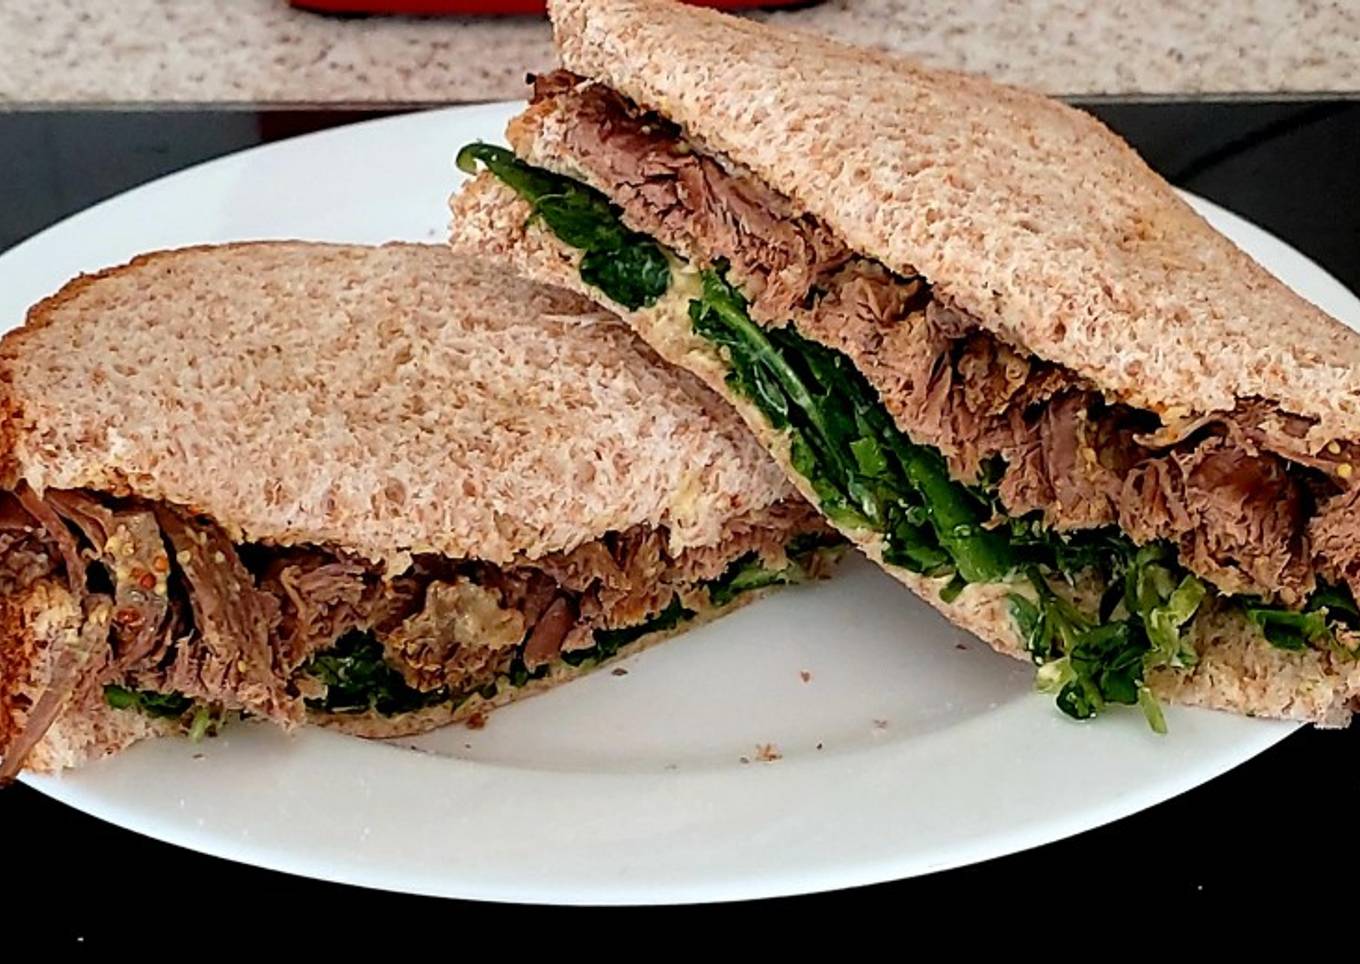 My leftover Triple Beef Sandwich with peppery Rocket and Mustard